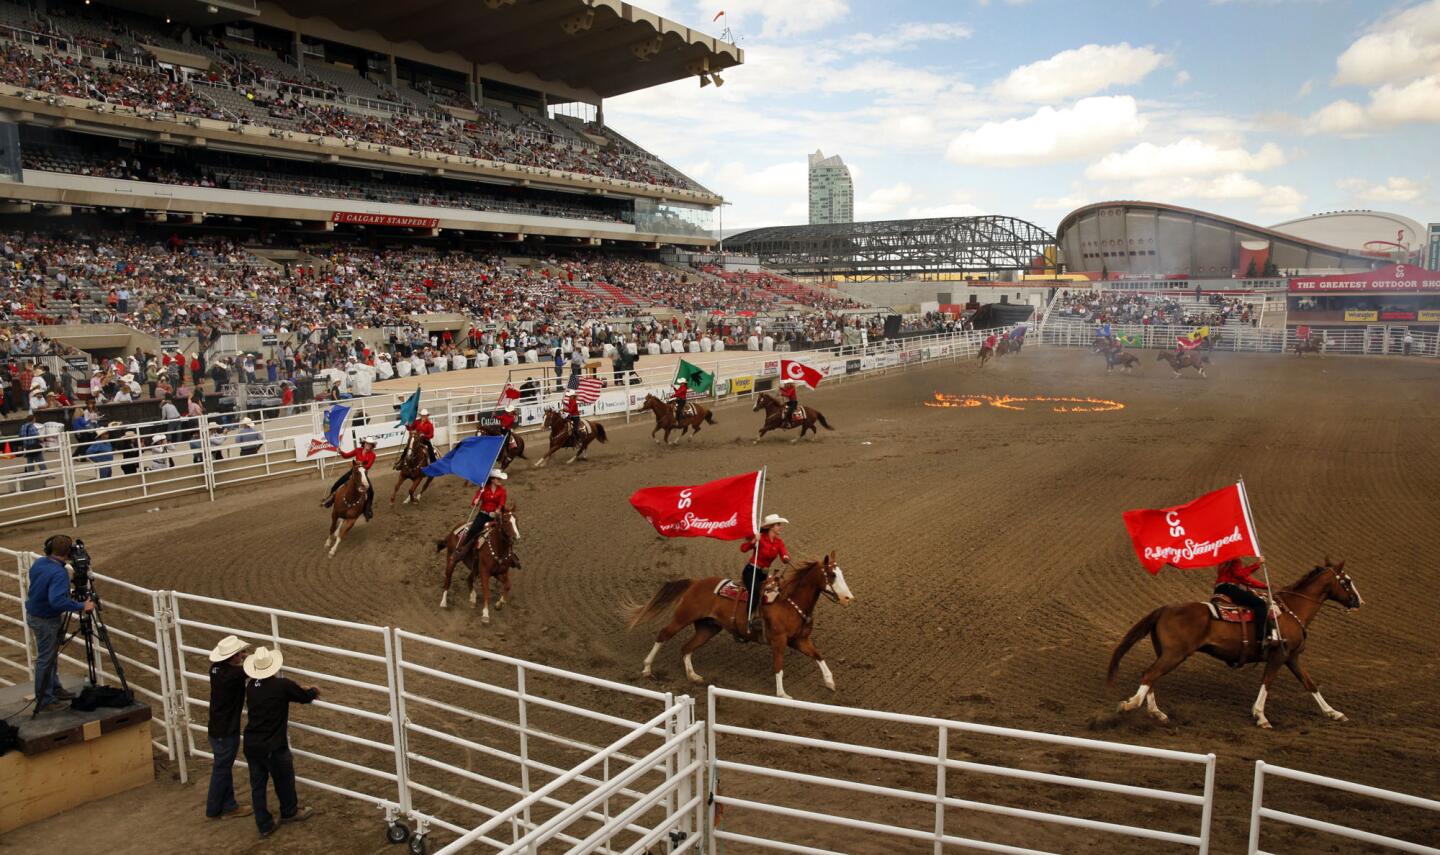 Horsemanship is a central element in the annual Calgary Stampede, which includes a rodeo. These riders were part of opening ceremonies for the 2013 Stampede.